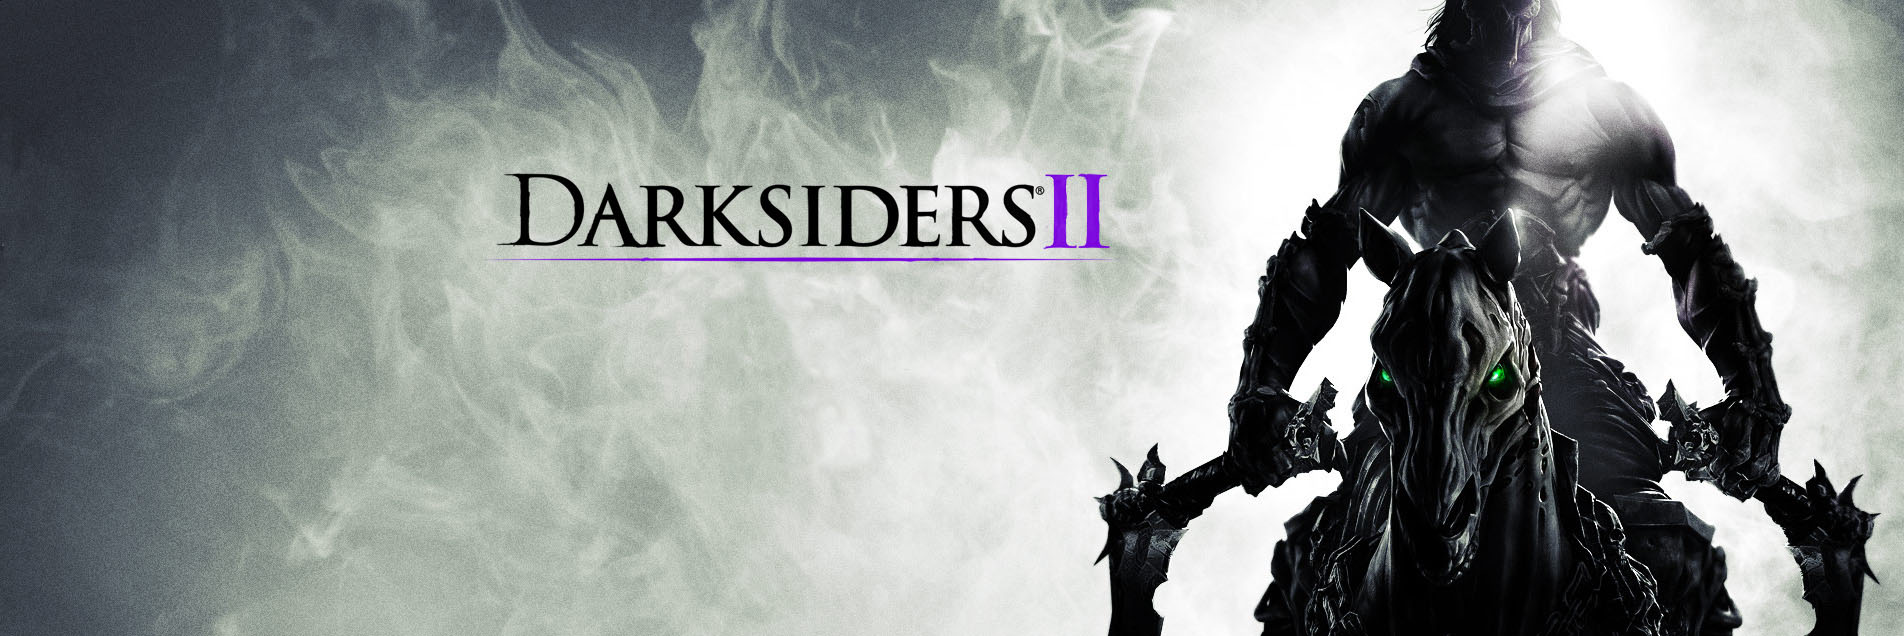 Darksiders 2 Official Cover Art Image